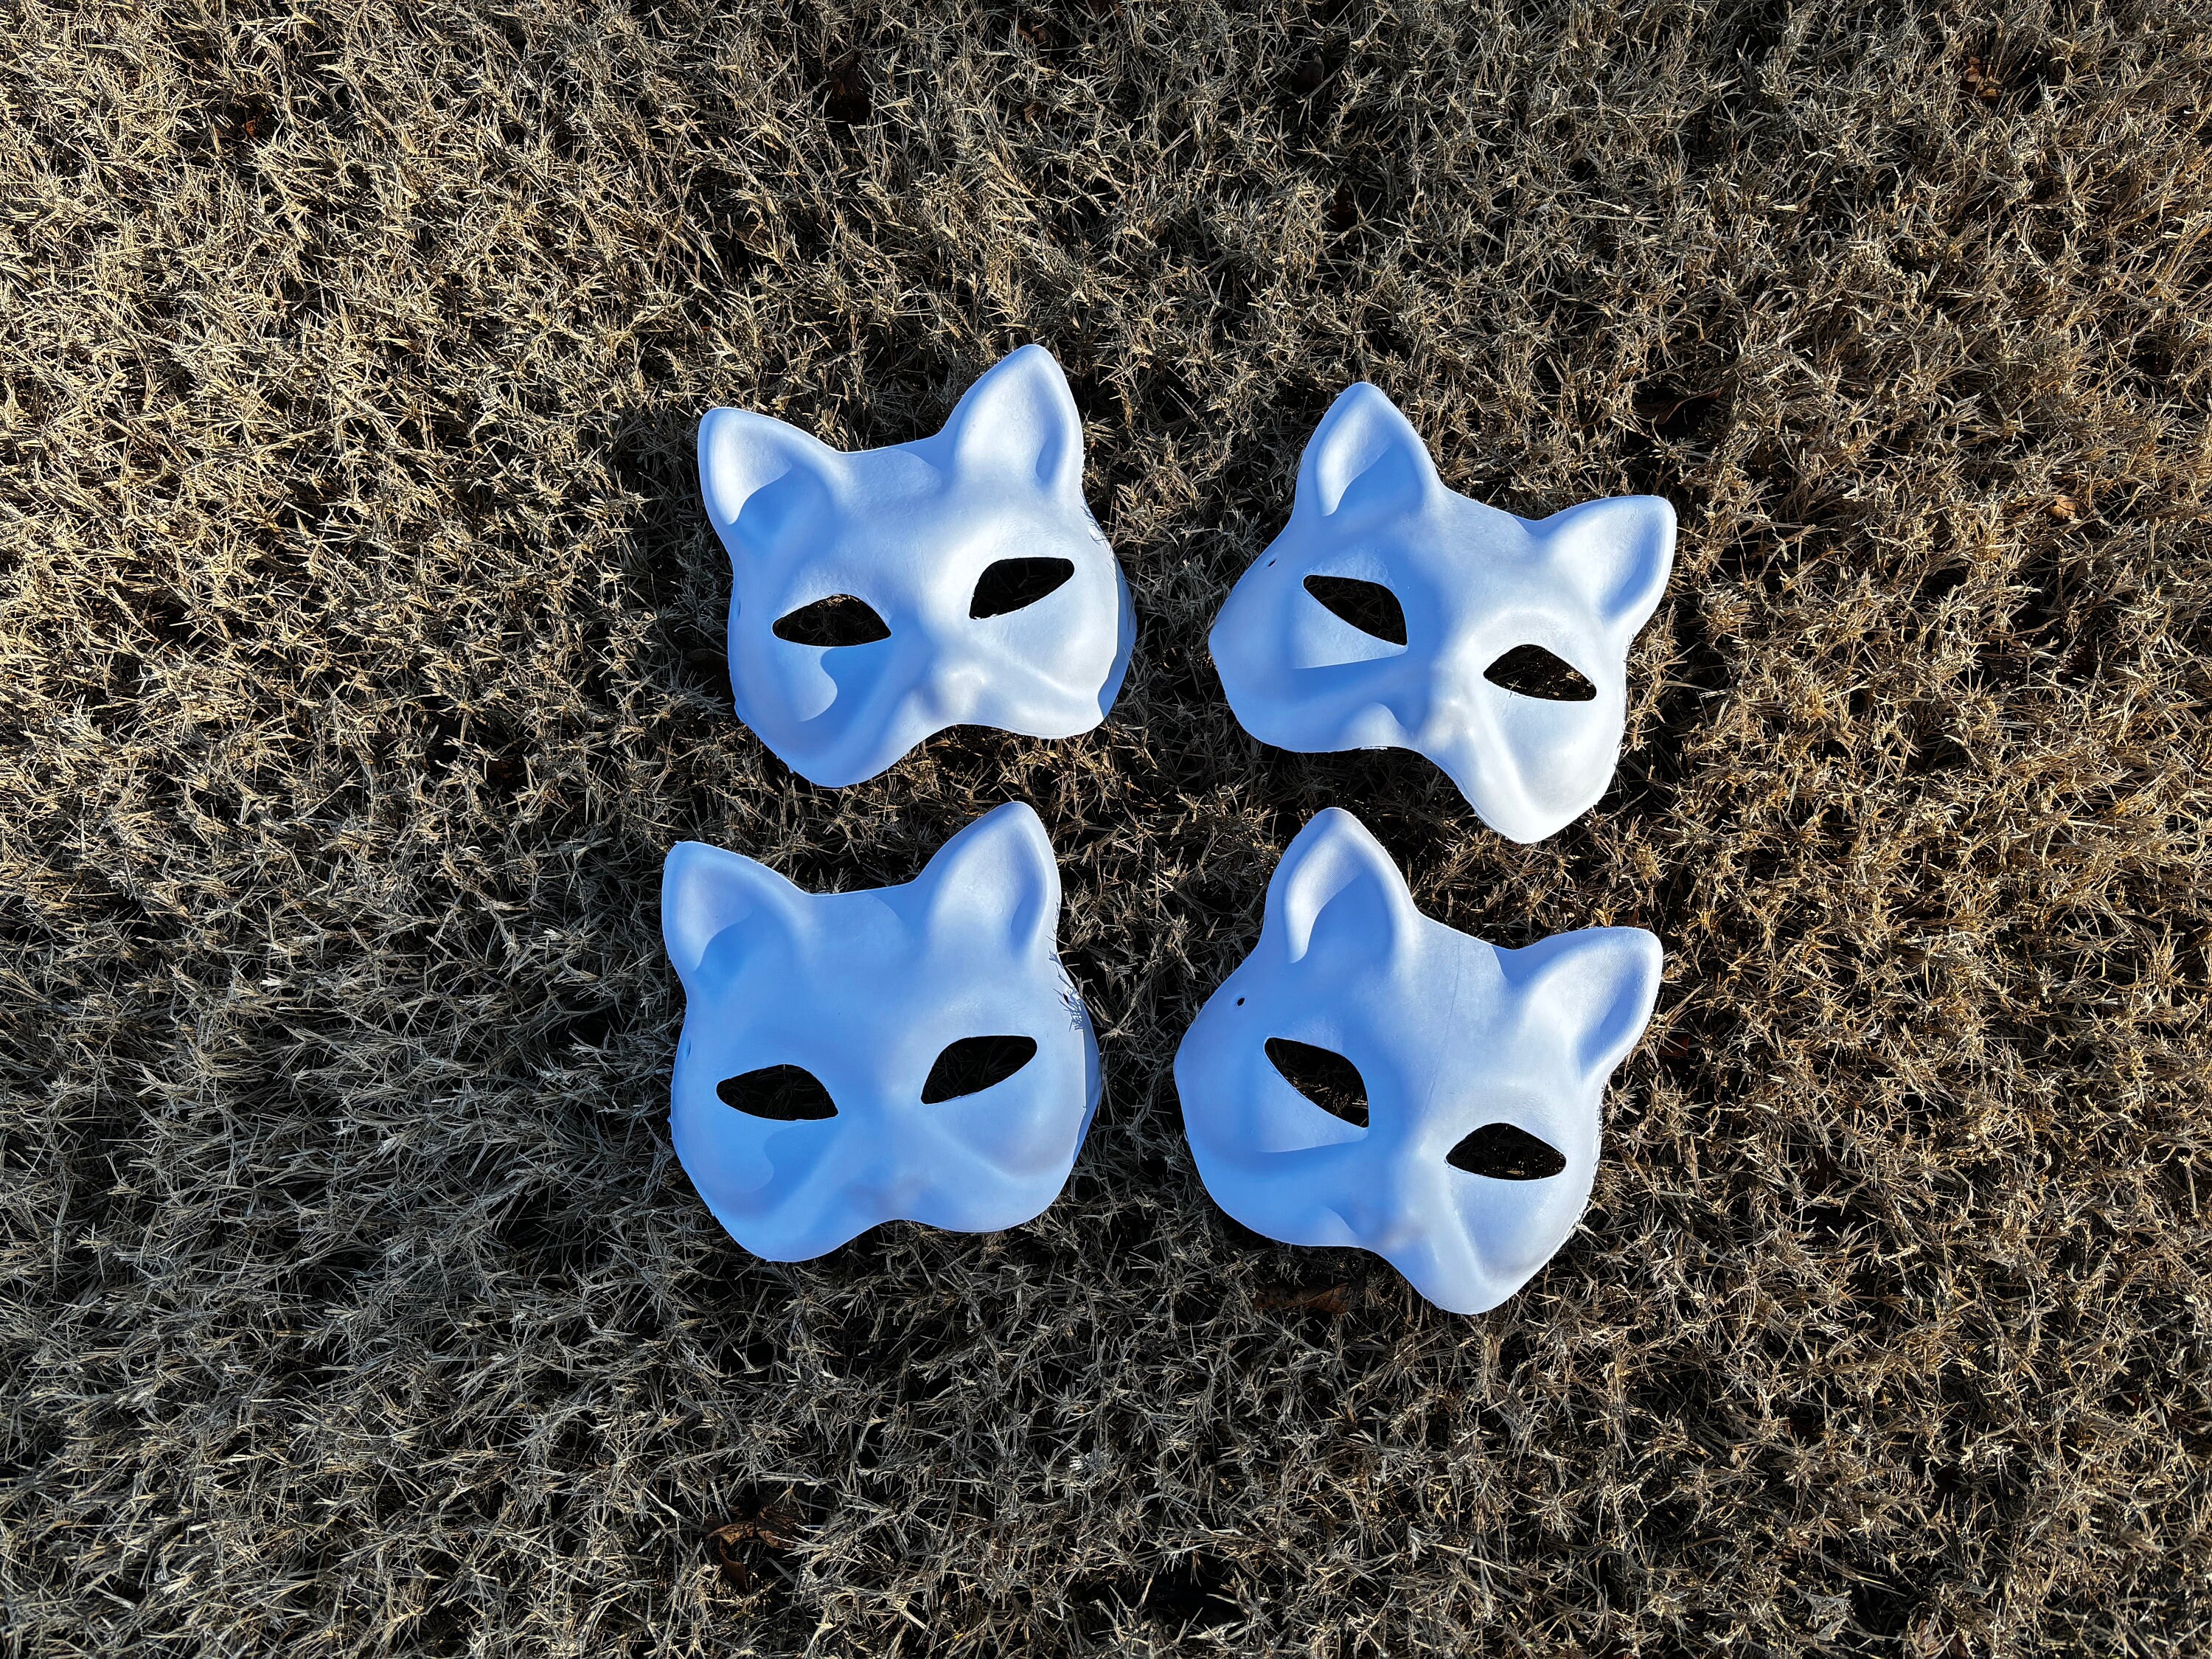  Moocorvic Cat Mask - Therian Masks White Cat Mask, Blank DIY Cat  Masks to Paint, Half Blank Fox Mask for Halloween Party Dress Up (15PC) :  Home & Kitchen